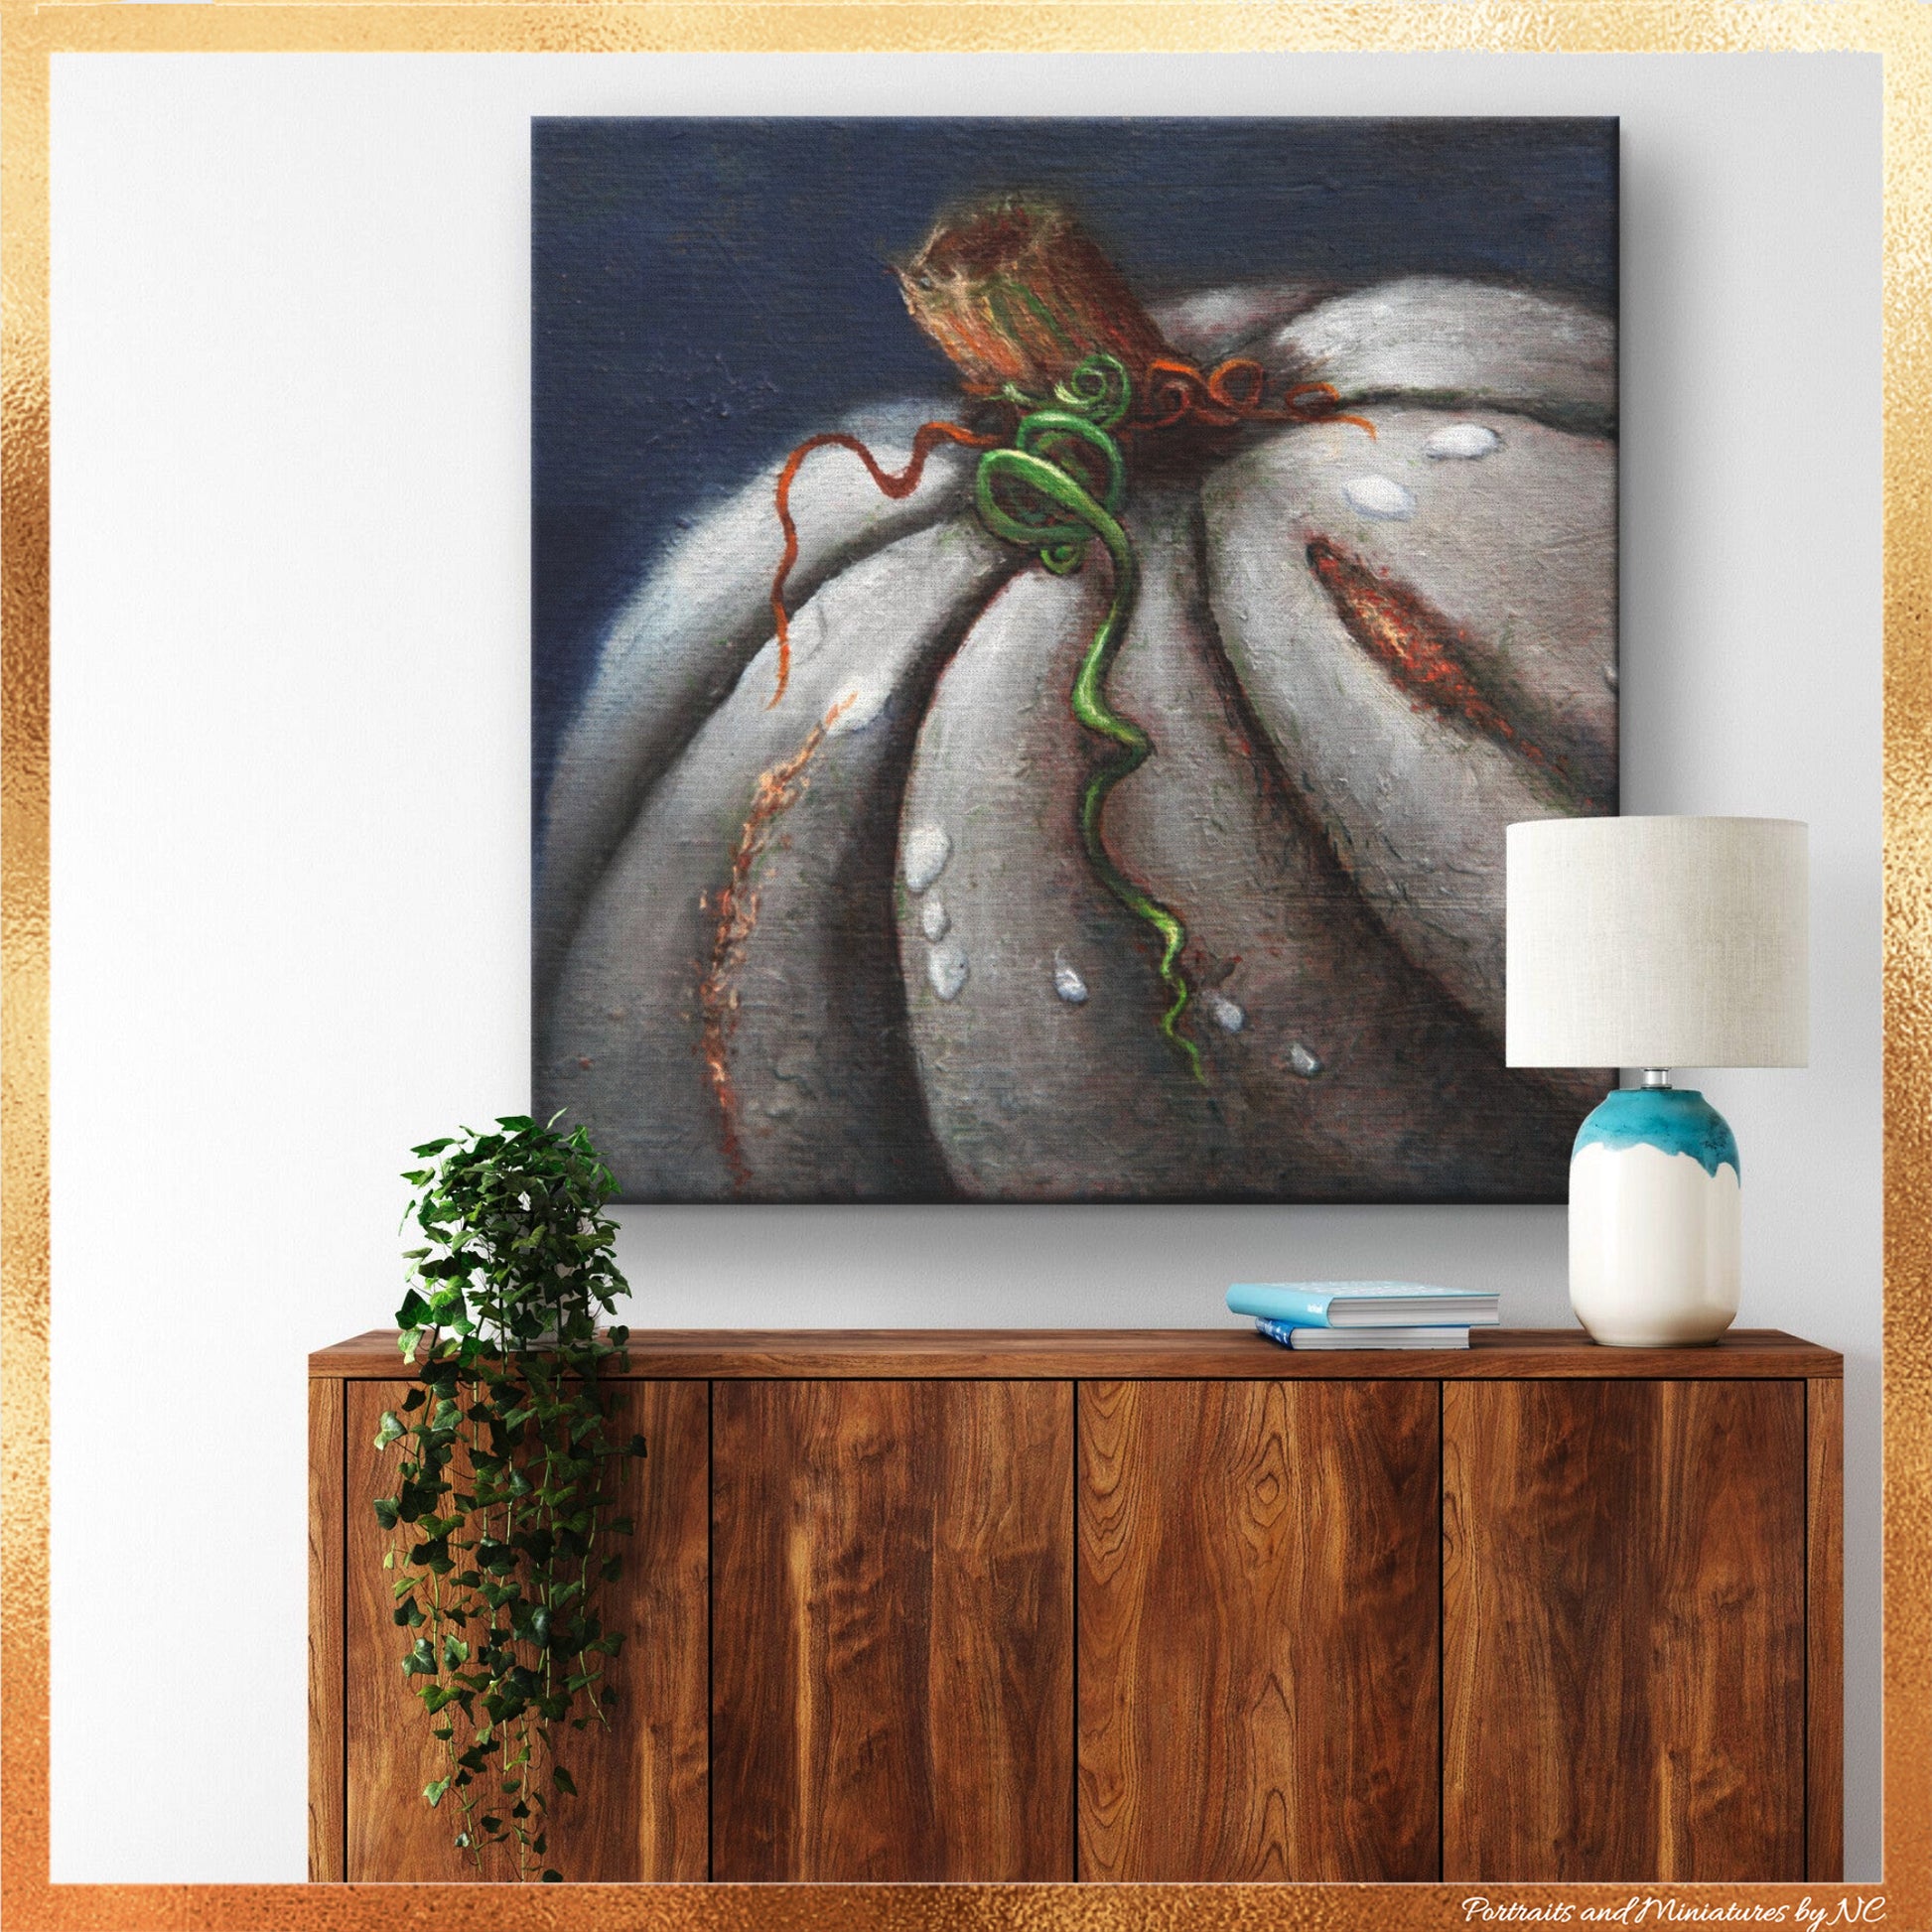 Pumpkin Stretched Canvas Print -Kissed by the Moon over furniture